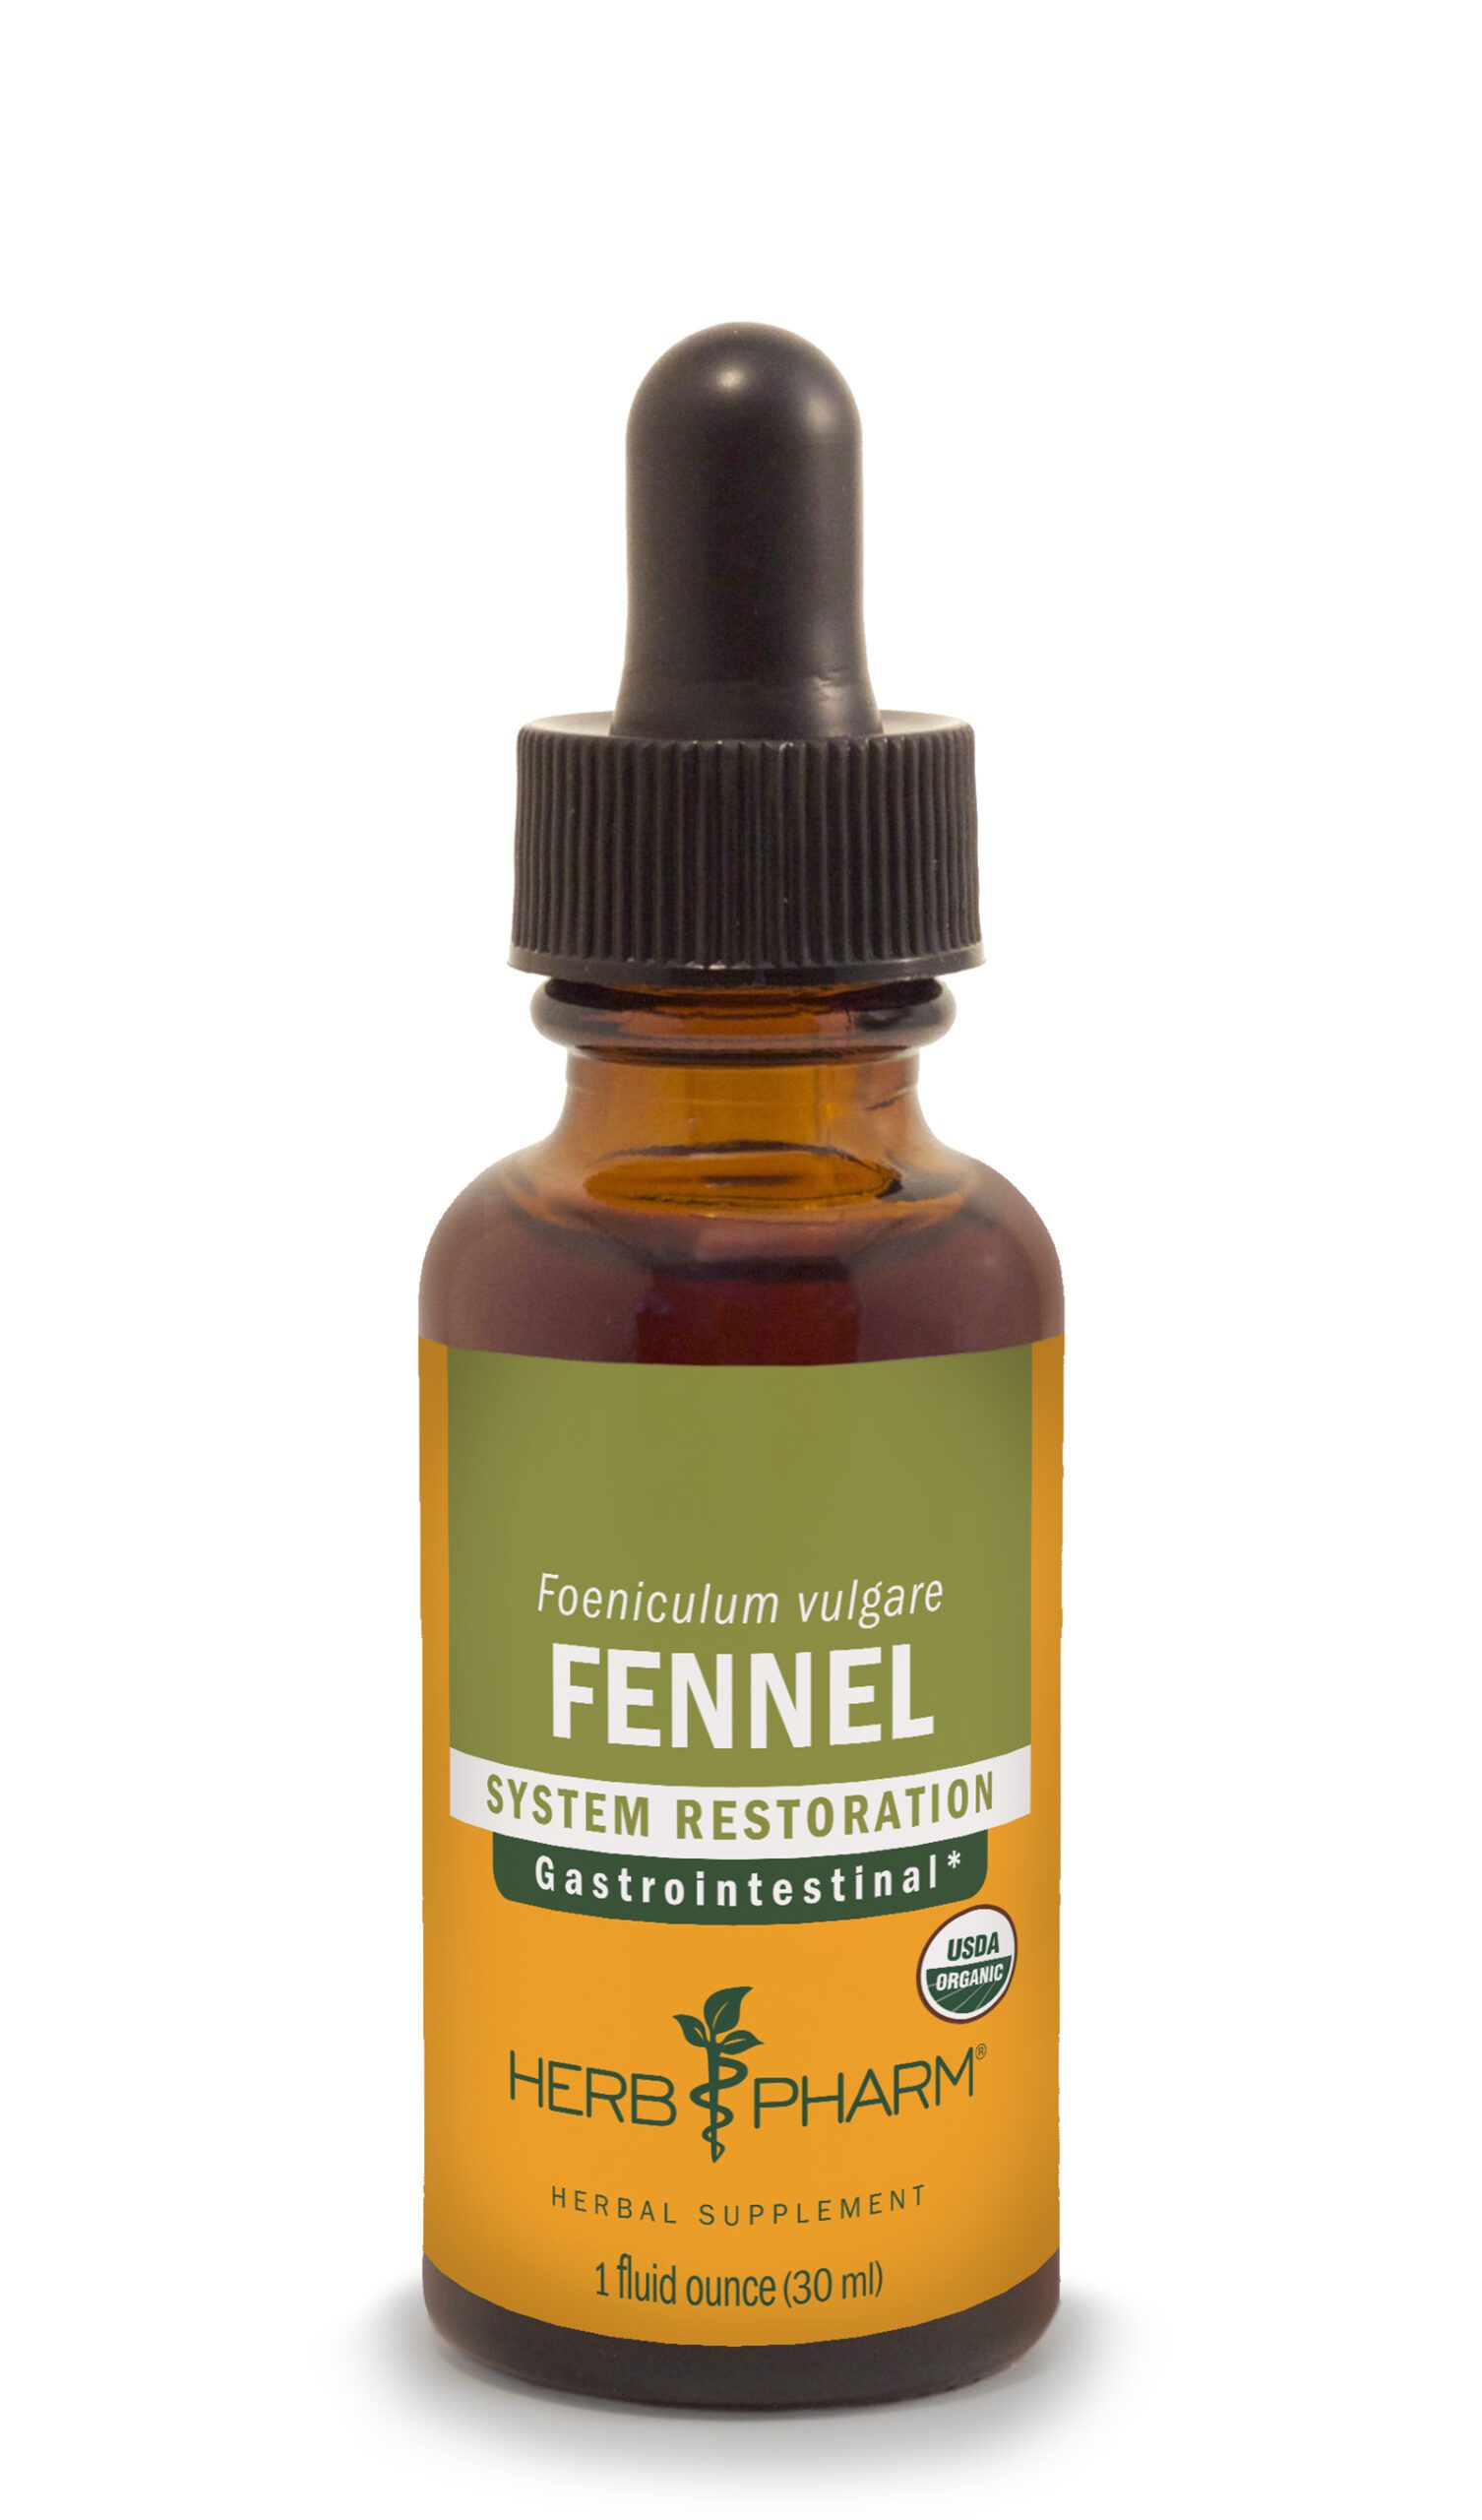 Product Listing Image for Herb Pharm Fennel Tincture 1oz